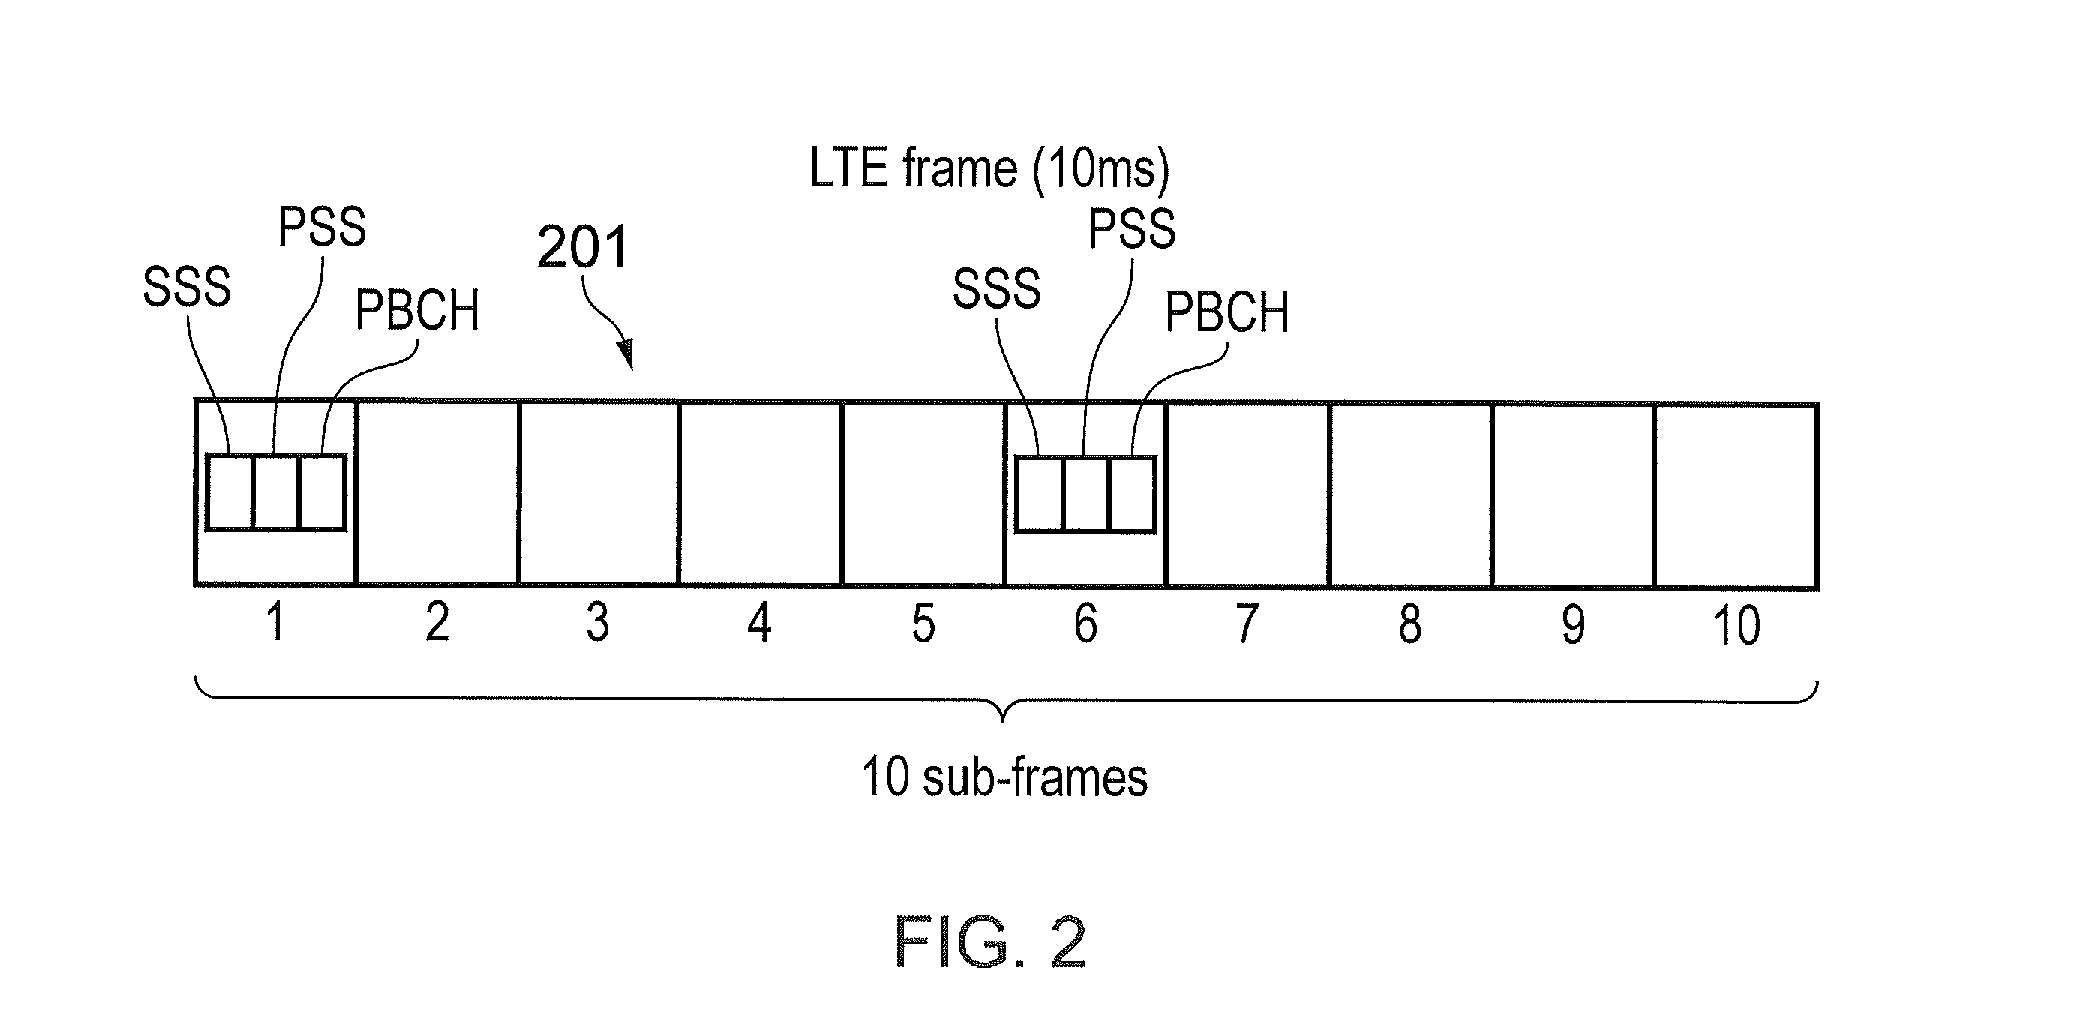 Communications device, infrastructure equipment and methods for LTE communication within unused GSM channels